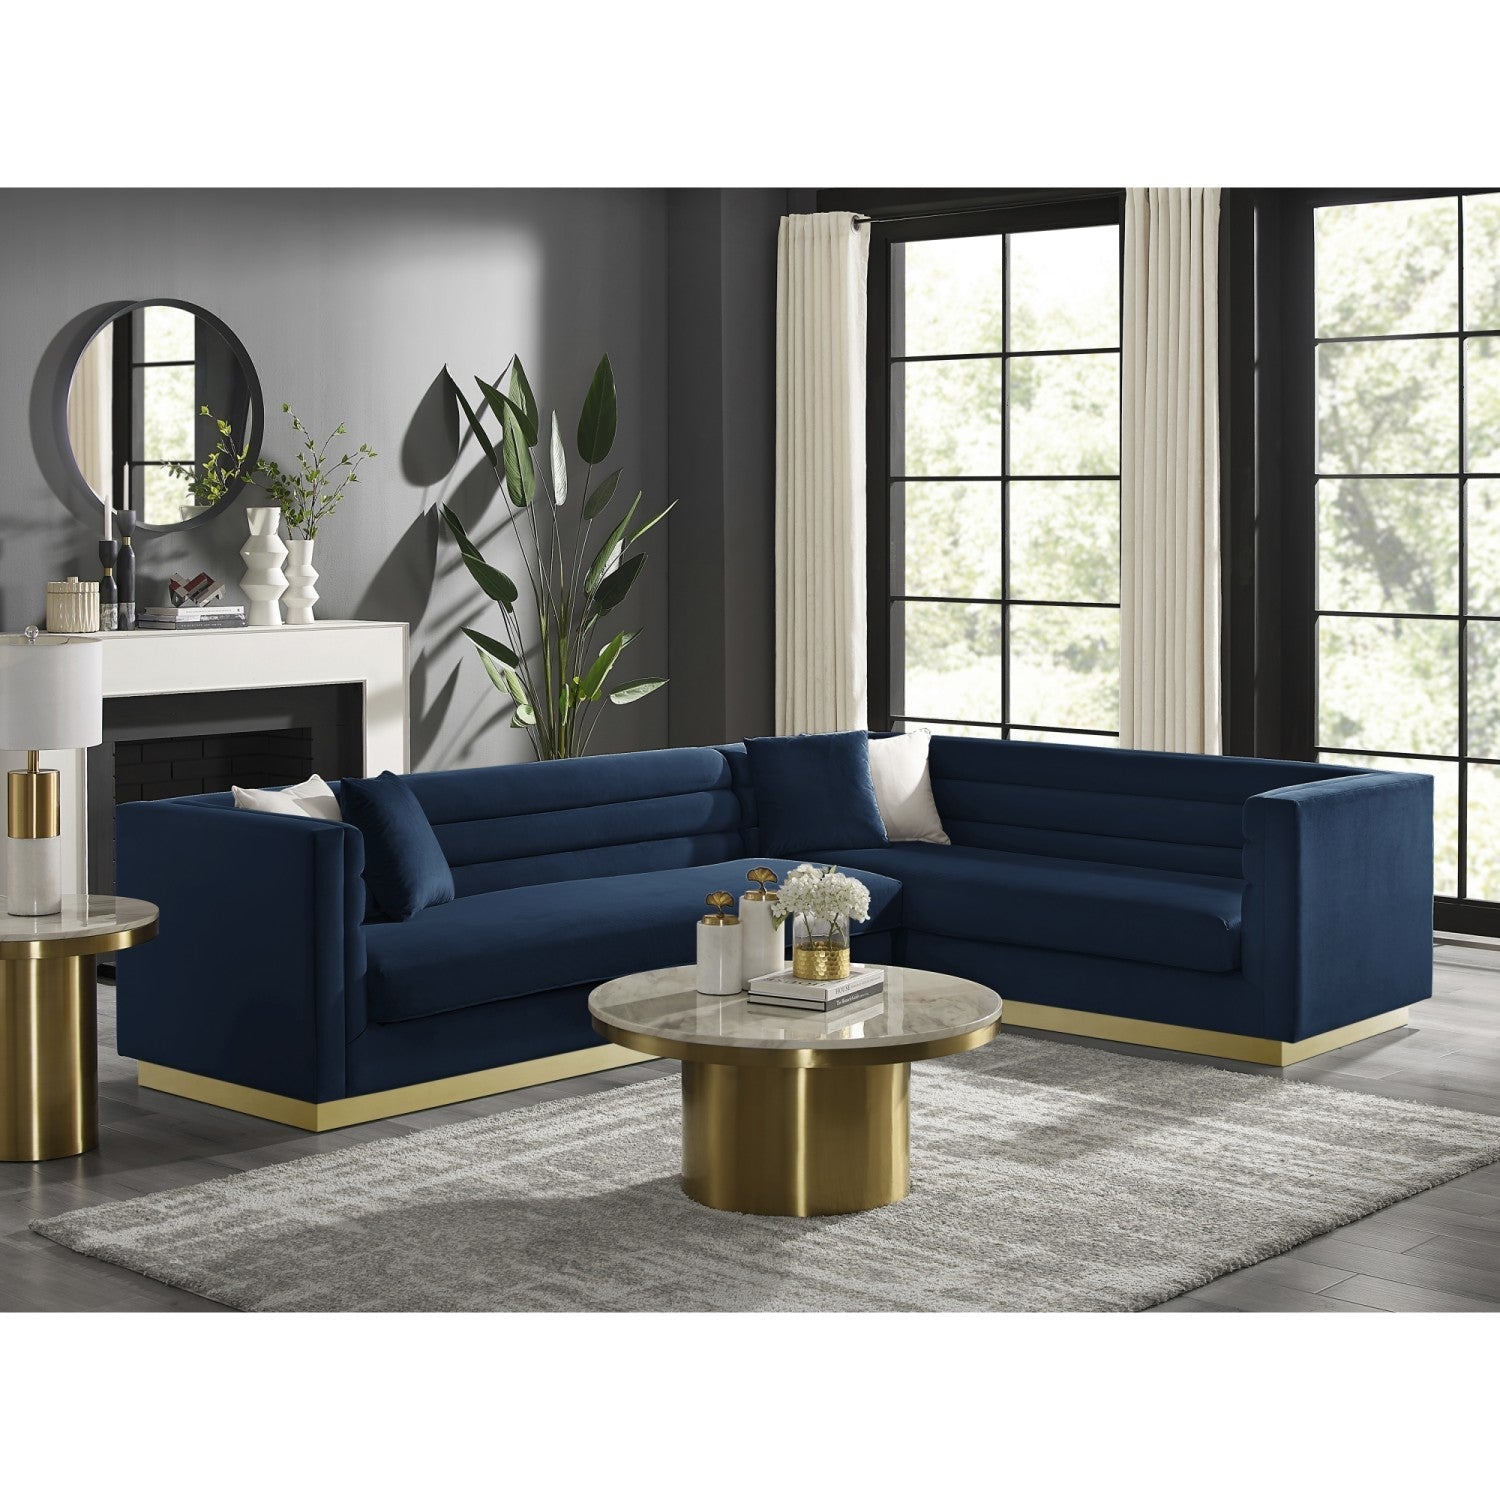 Anniston Modern Sofa Upholstered, Square Arms for Living Room ...